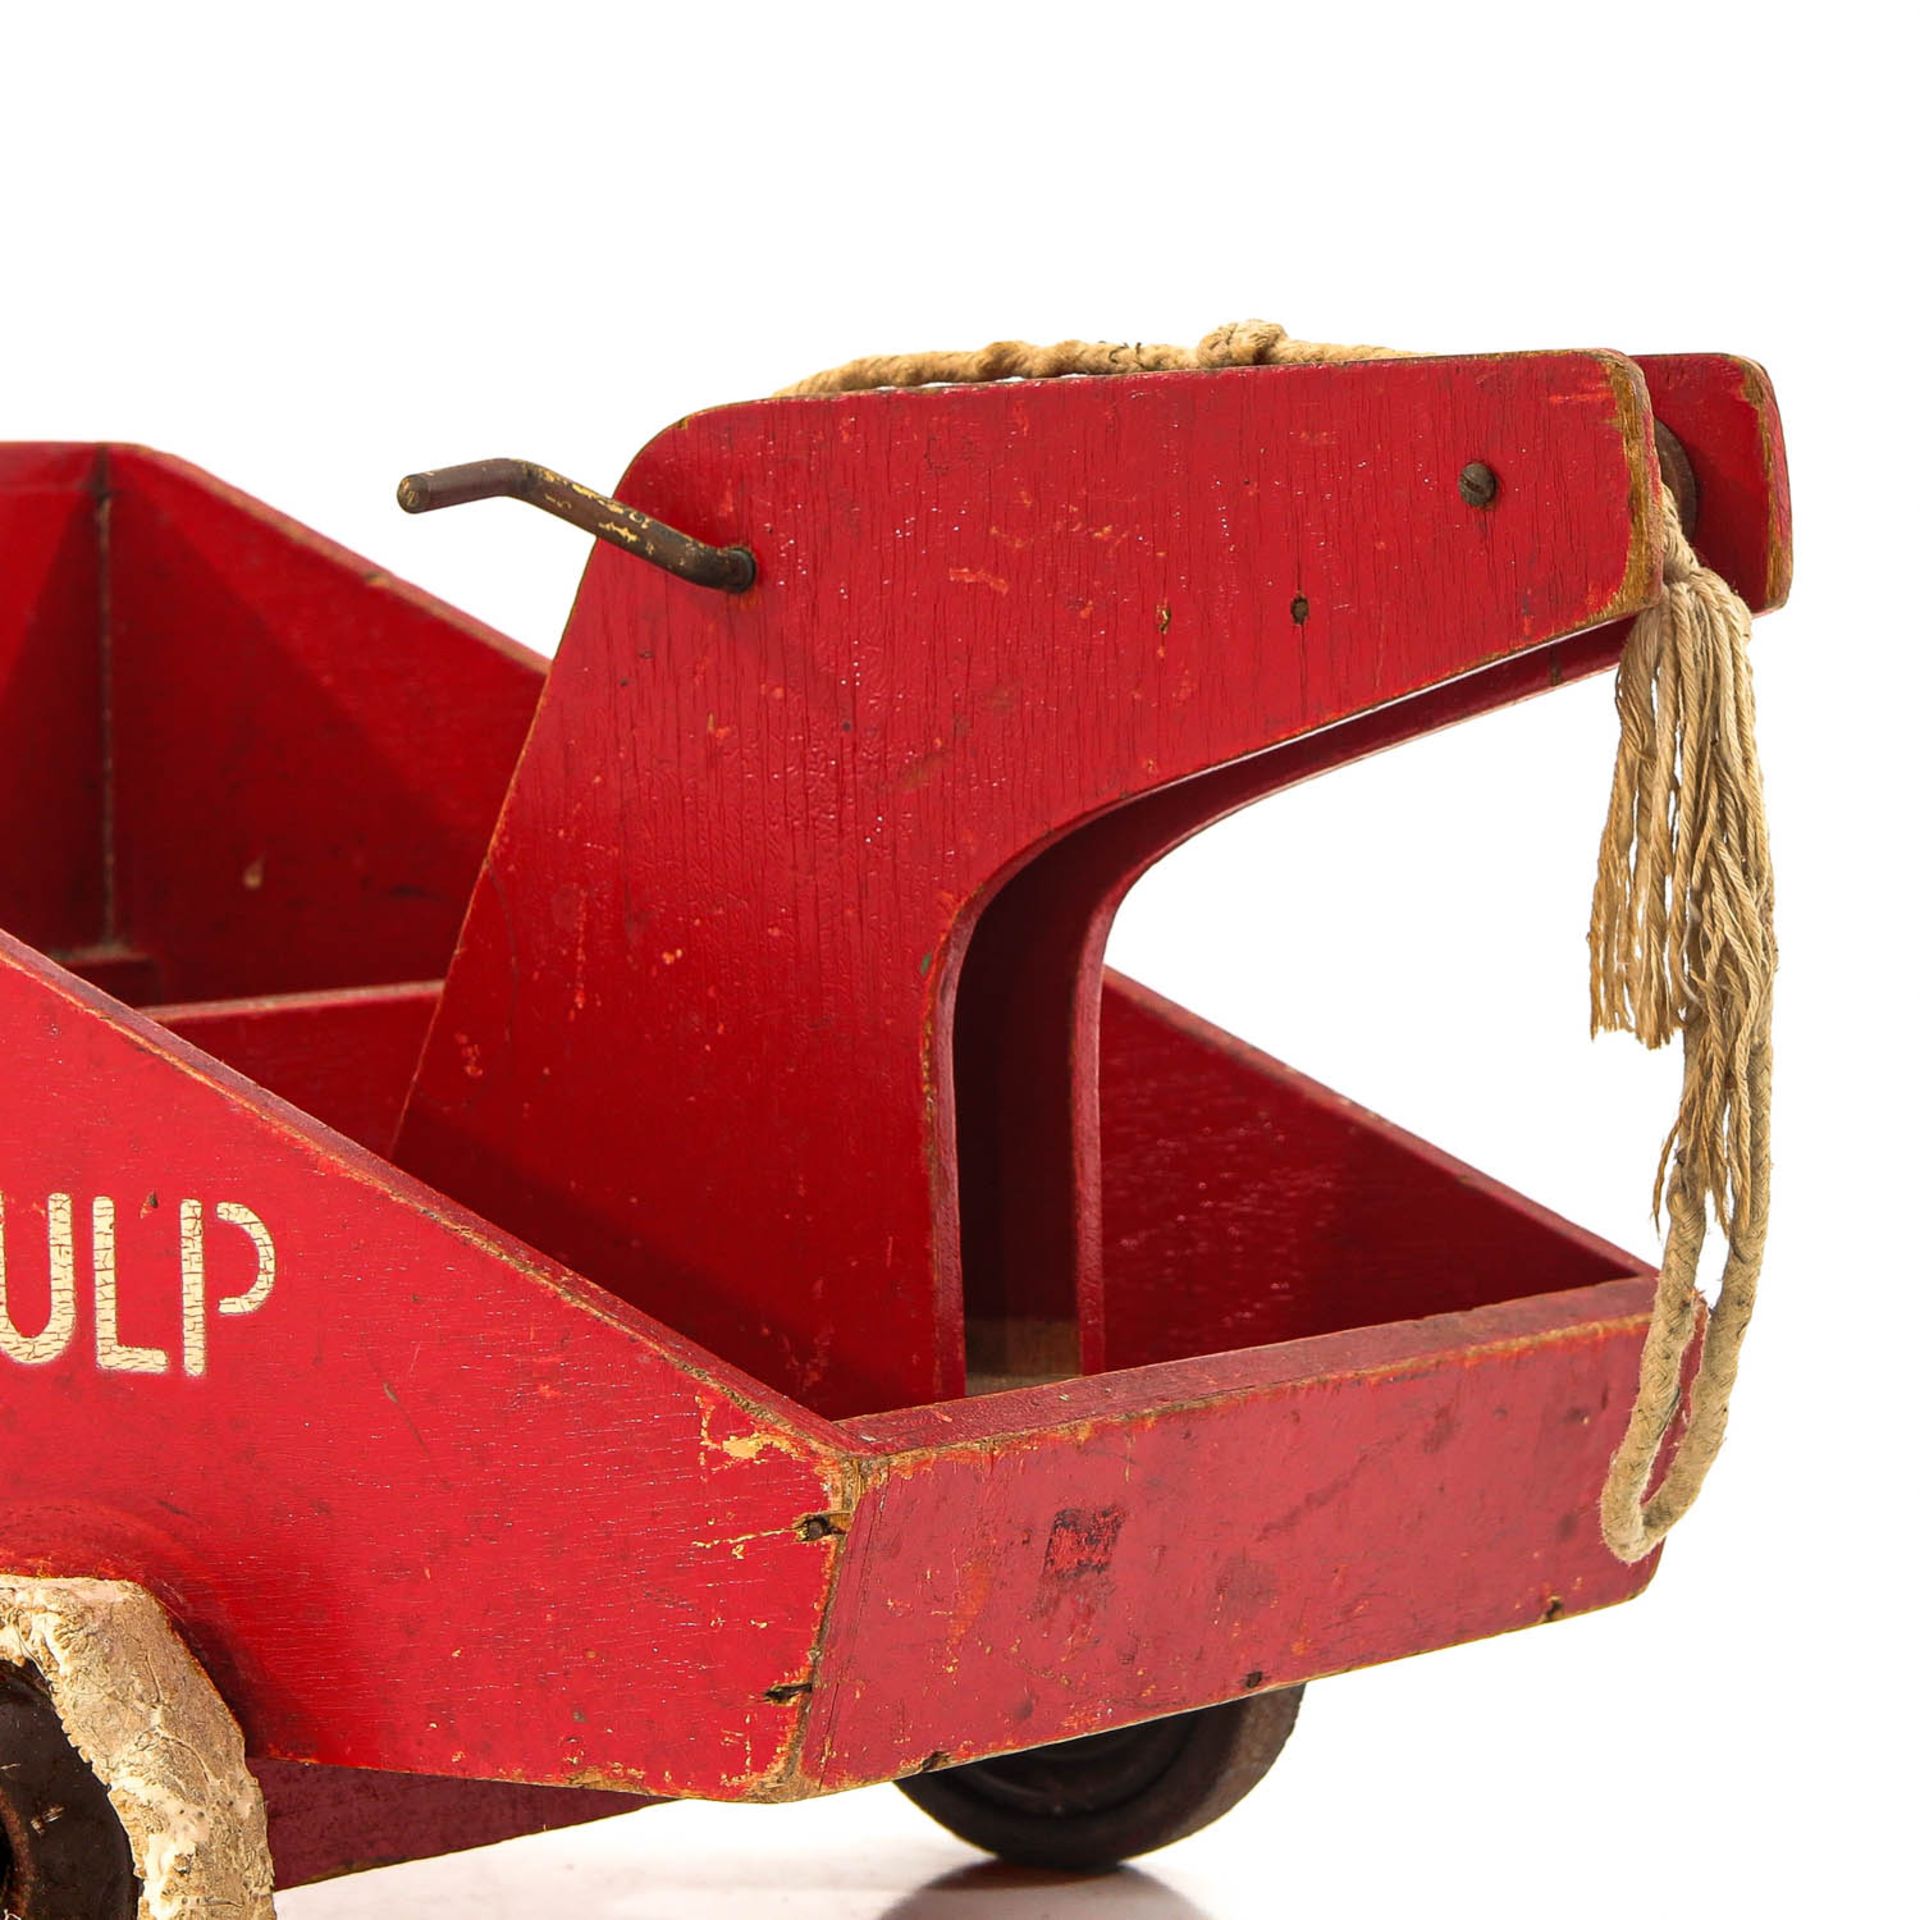 An ADO Wood Toy Truck - Image 9 of 10